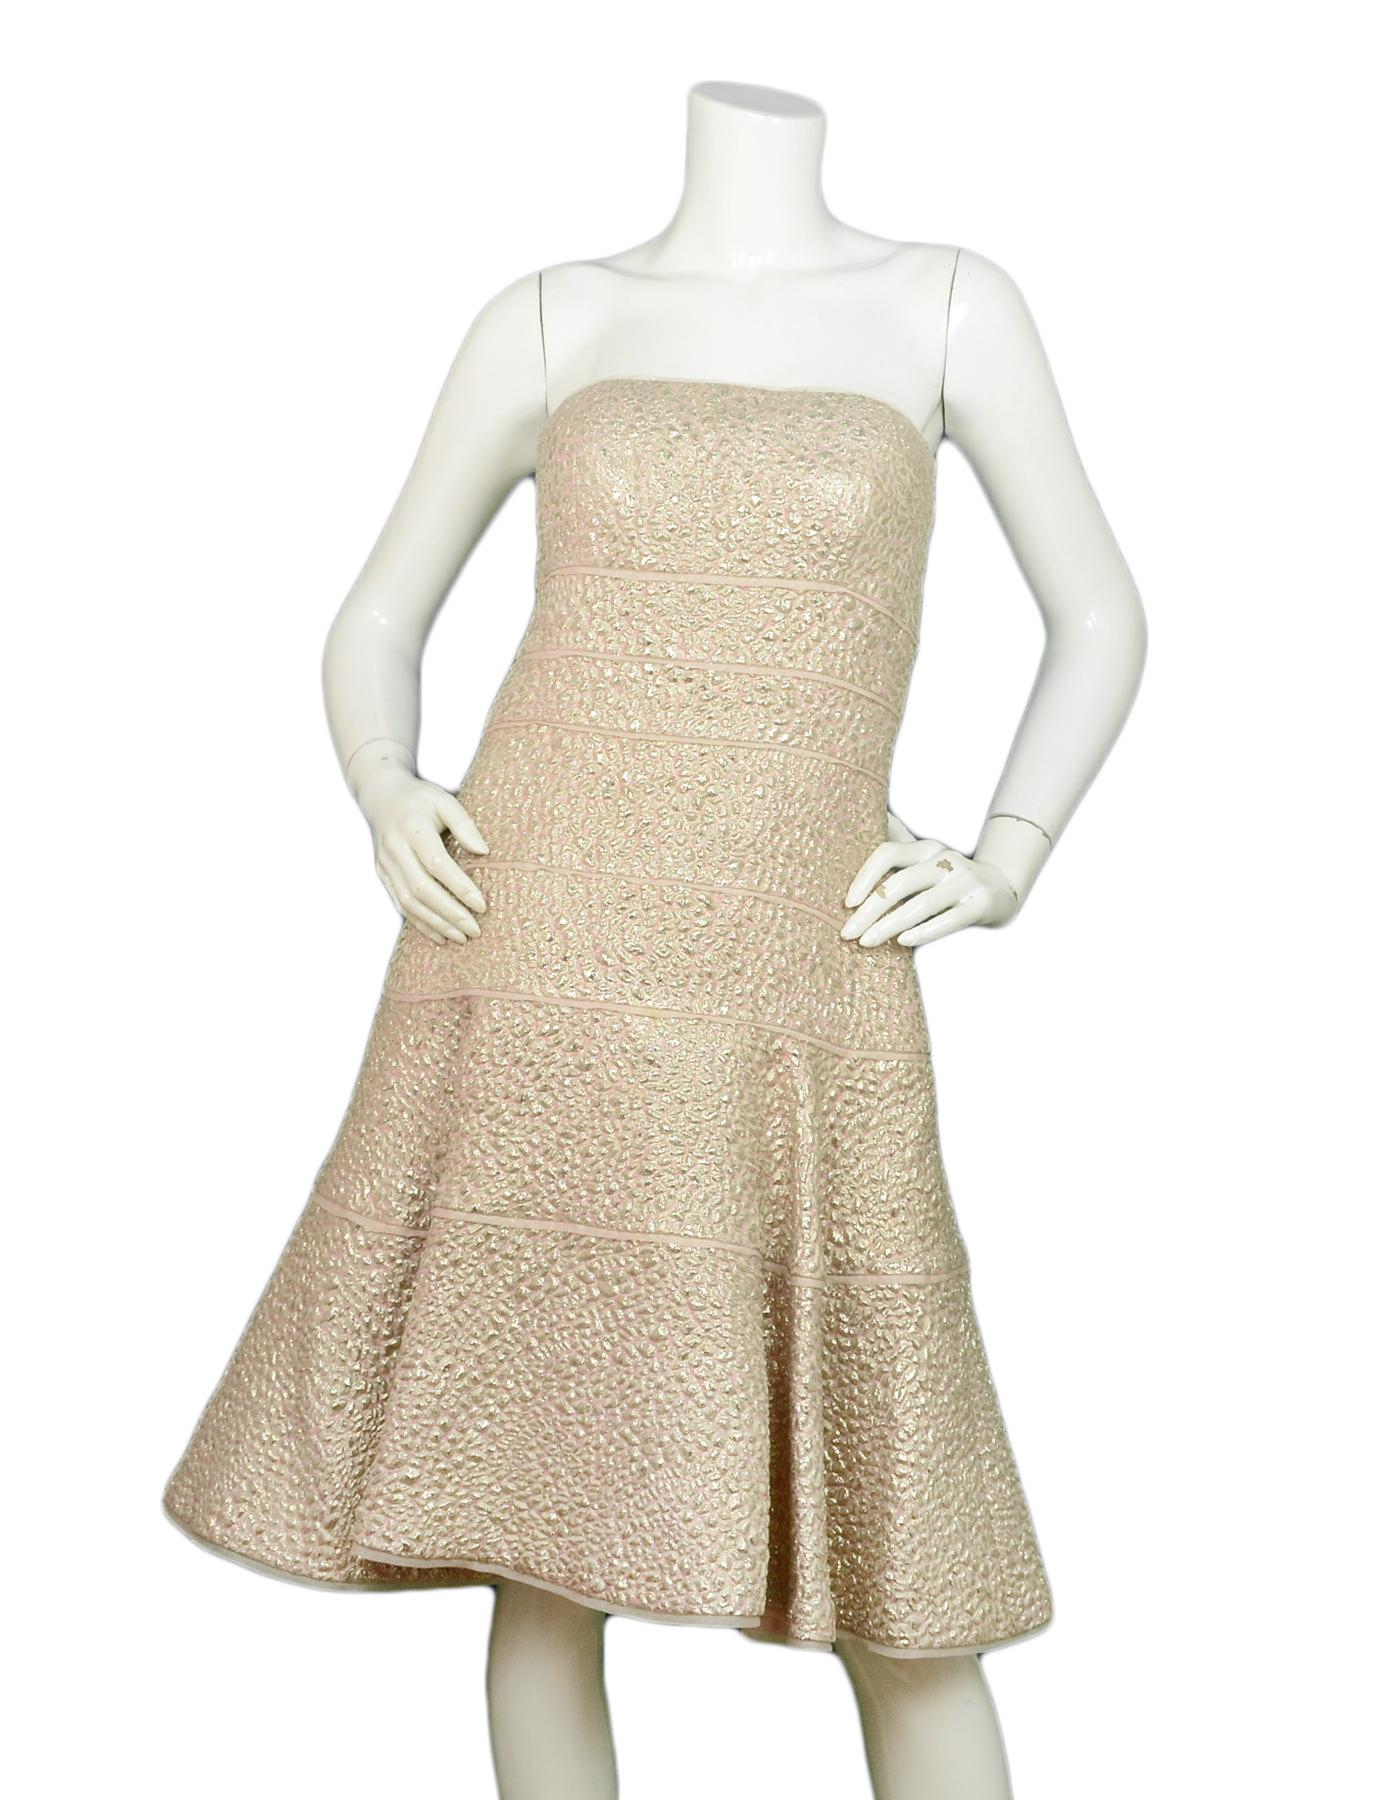 Oscar de la Renta Champagne Metallic Strapless Fit and Flare Dress sz 10

Made In: USA 
Color: Champagne
Materials: 38% Polyester, 24% Cotton, 21% Nylon, 17% Silk
Lining: 100% Silk
Closure/Opening: Back zip
Overall Condition: Excellent pre-owned